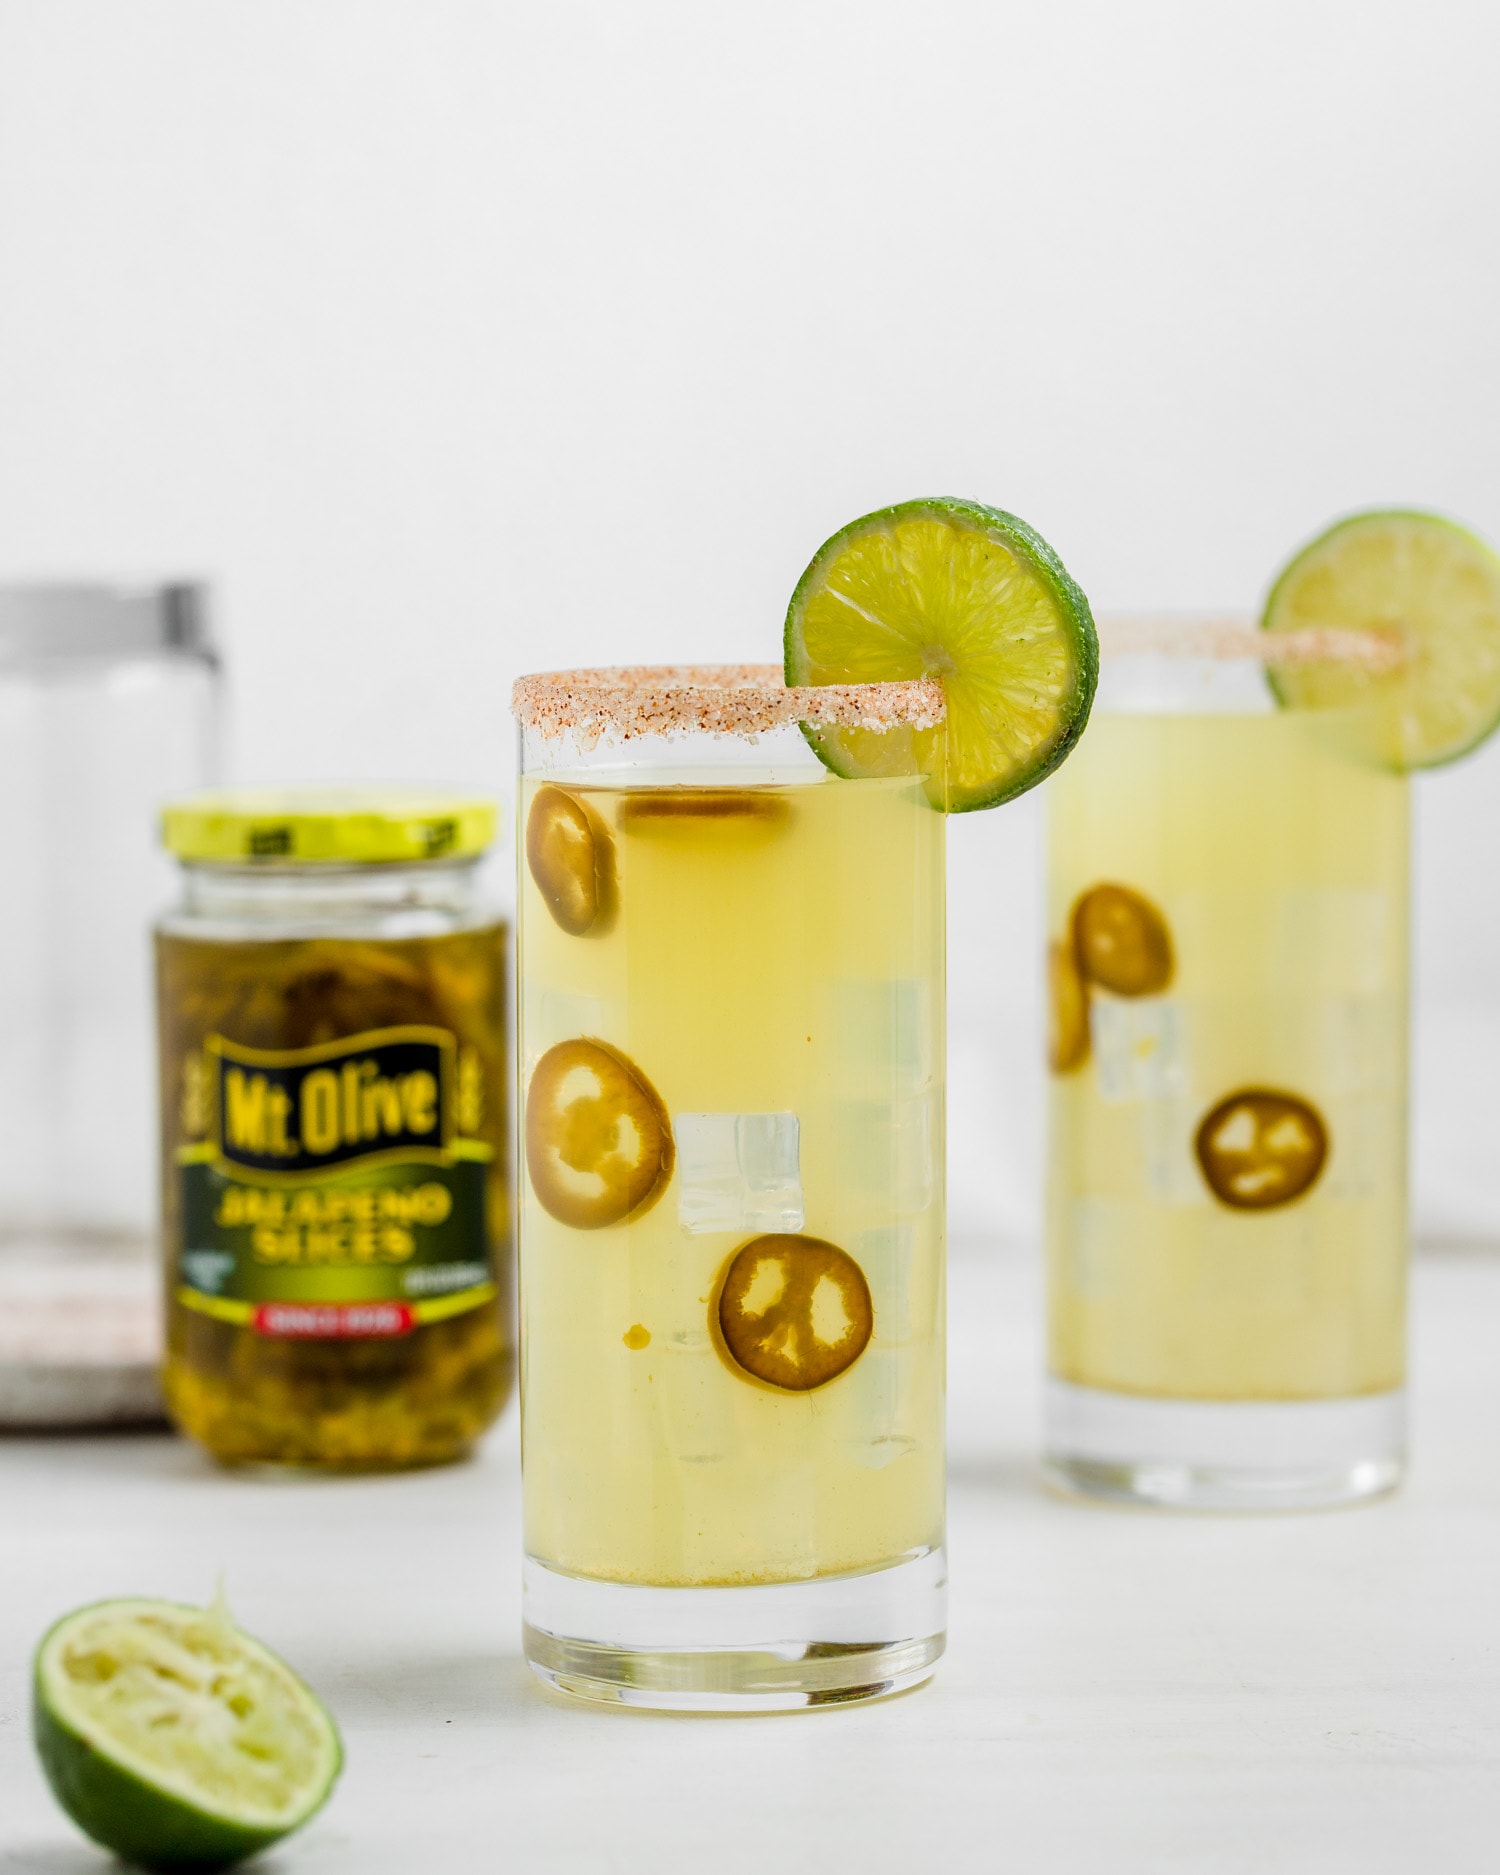 two glasses with margarita liquid (yellow) and jalapeno slices in the drink- garnished with lime slices. jar of Mt. Olive Jalapeno Slices in background.